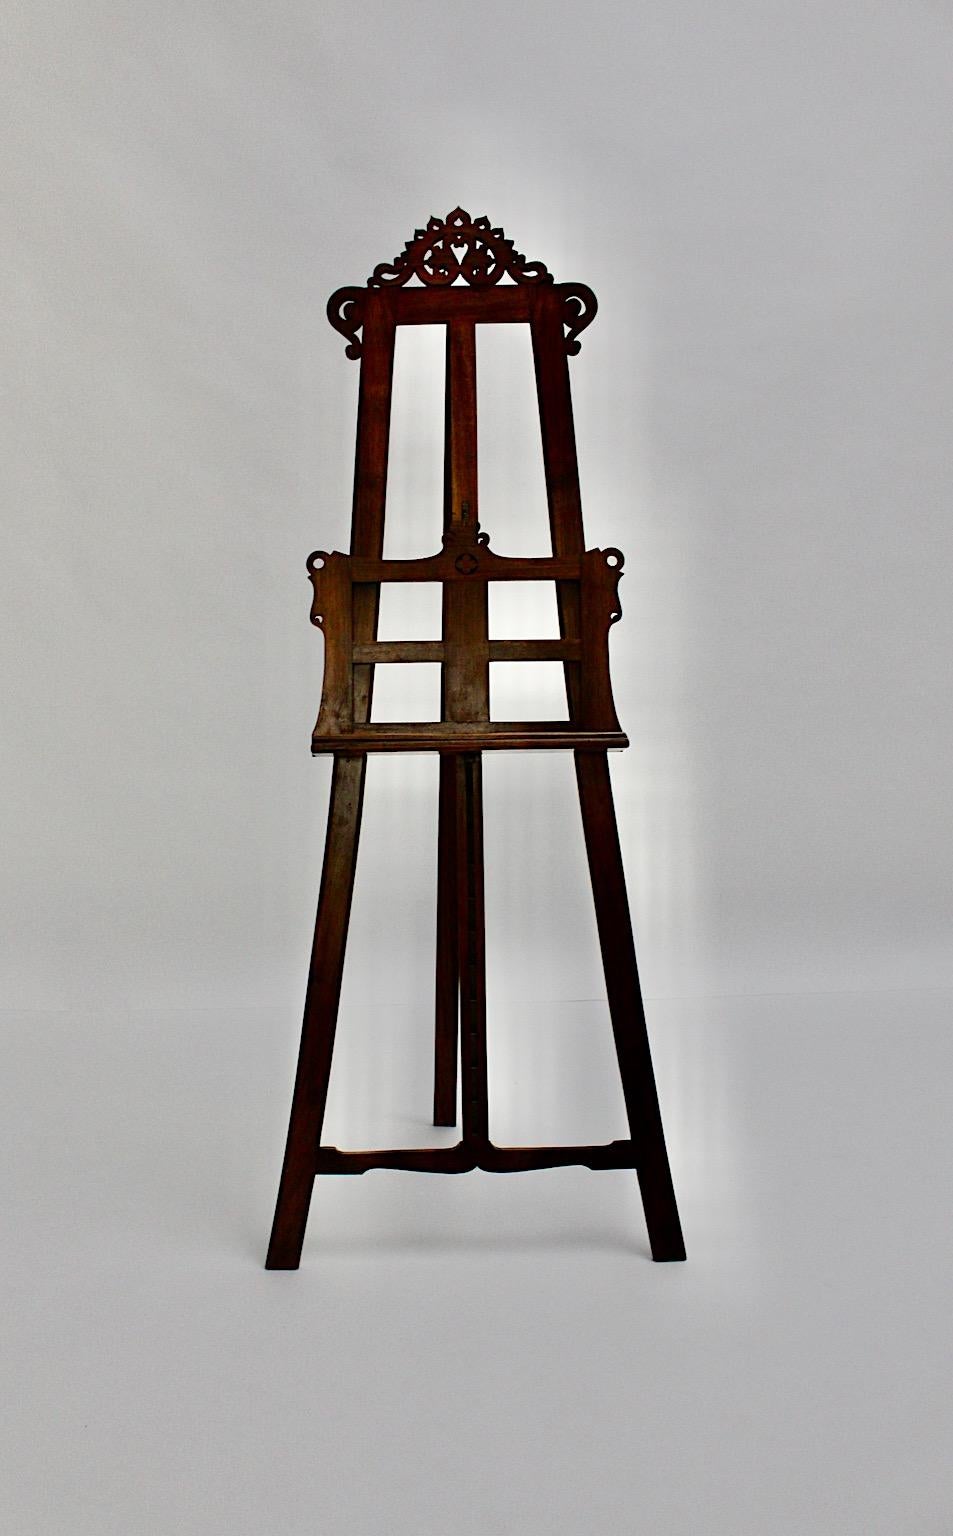 Historicism Neorokoko handcrafted vintage easel from solid walnut and brass details circa 1870 Austria.
The wonderful easel in the style of baroque is adjustable to height till 110 cm, which allows to show paintings in many various sizes. The rack